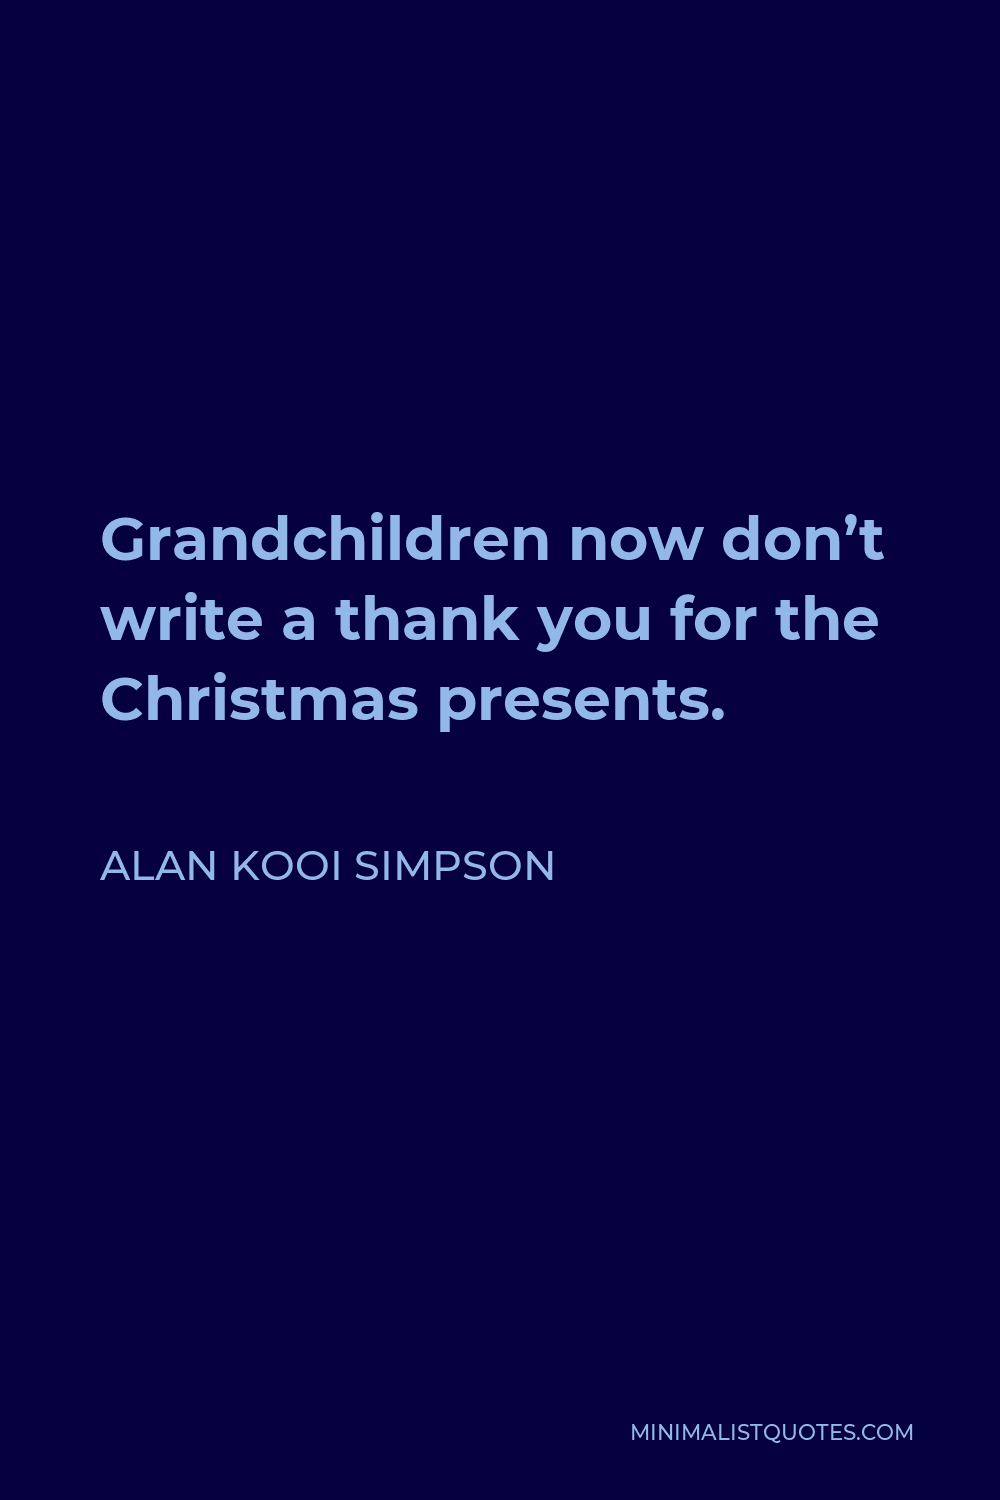 Alan Kooi Simpson Quote - Grandchildren now don’t write a thank you for the Christmas presents.